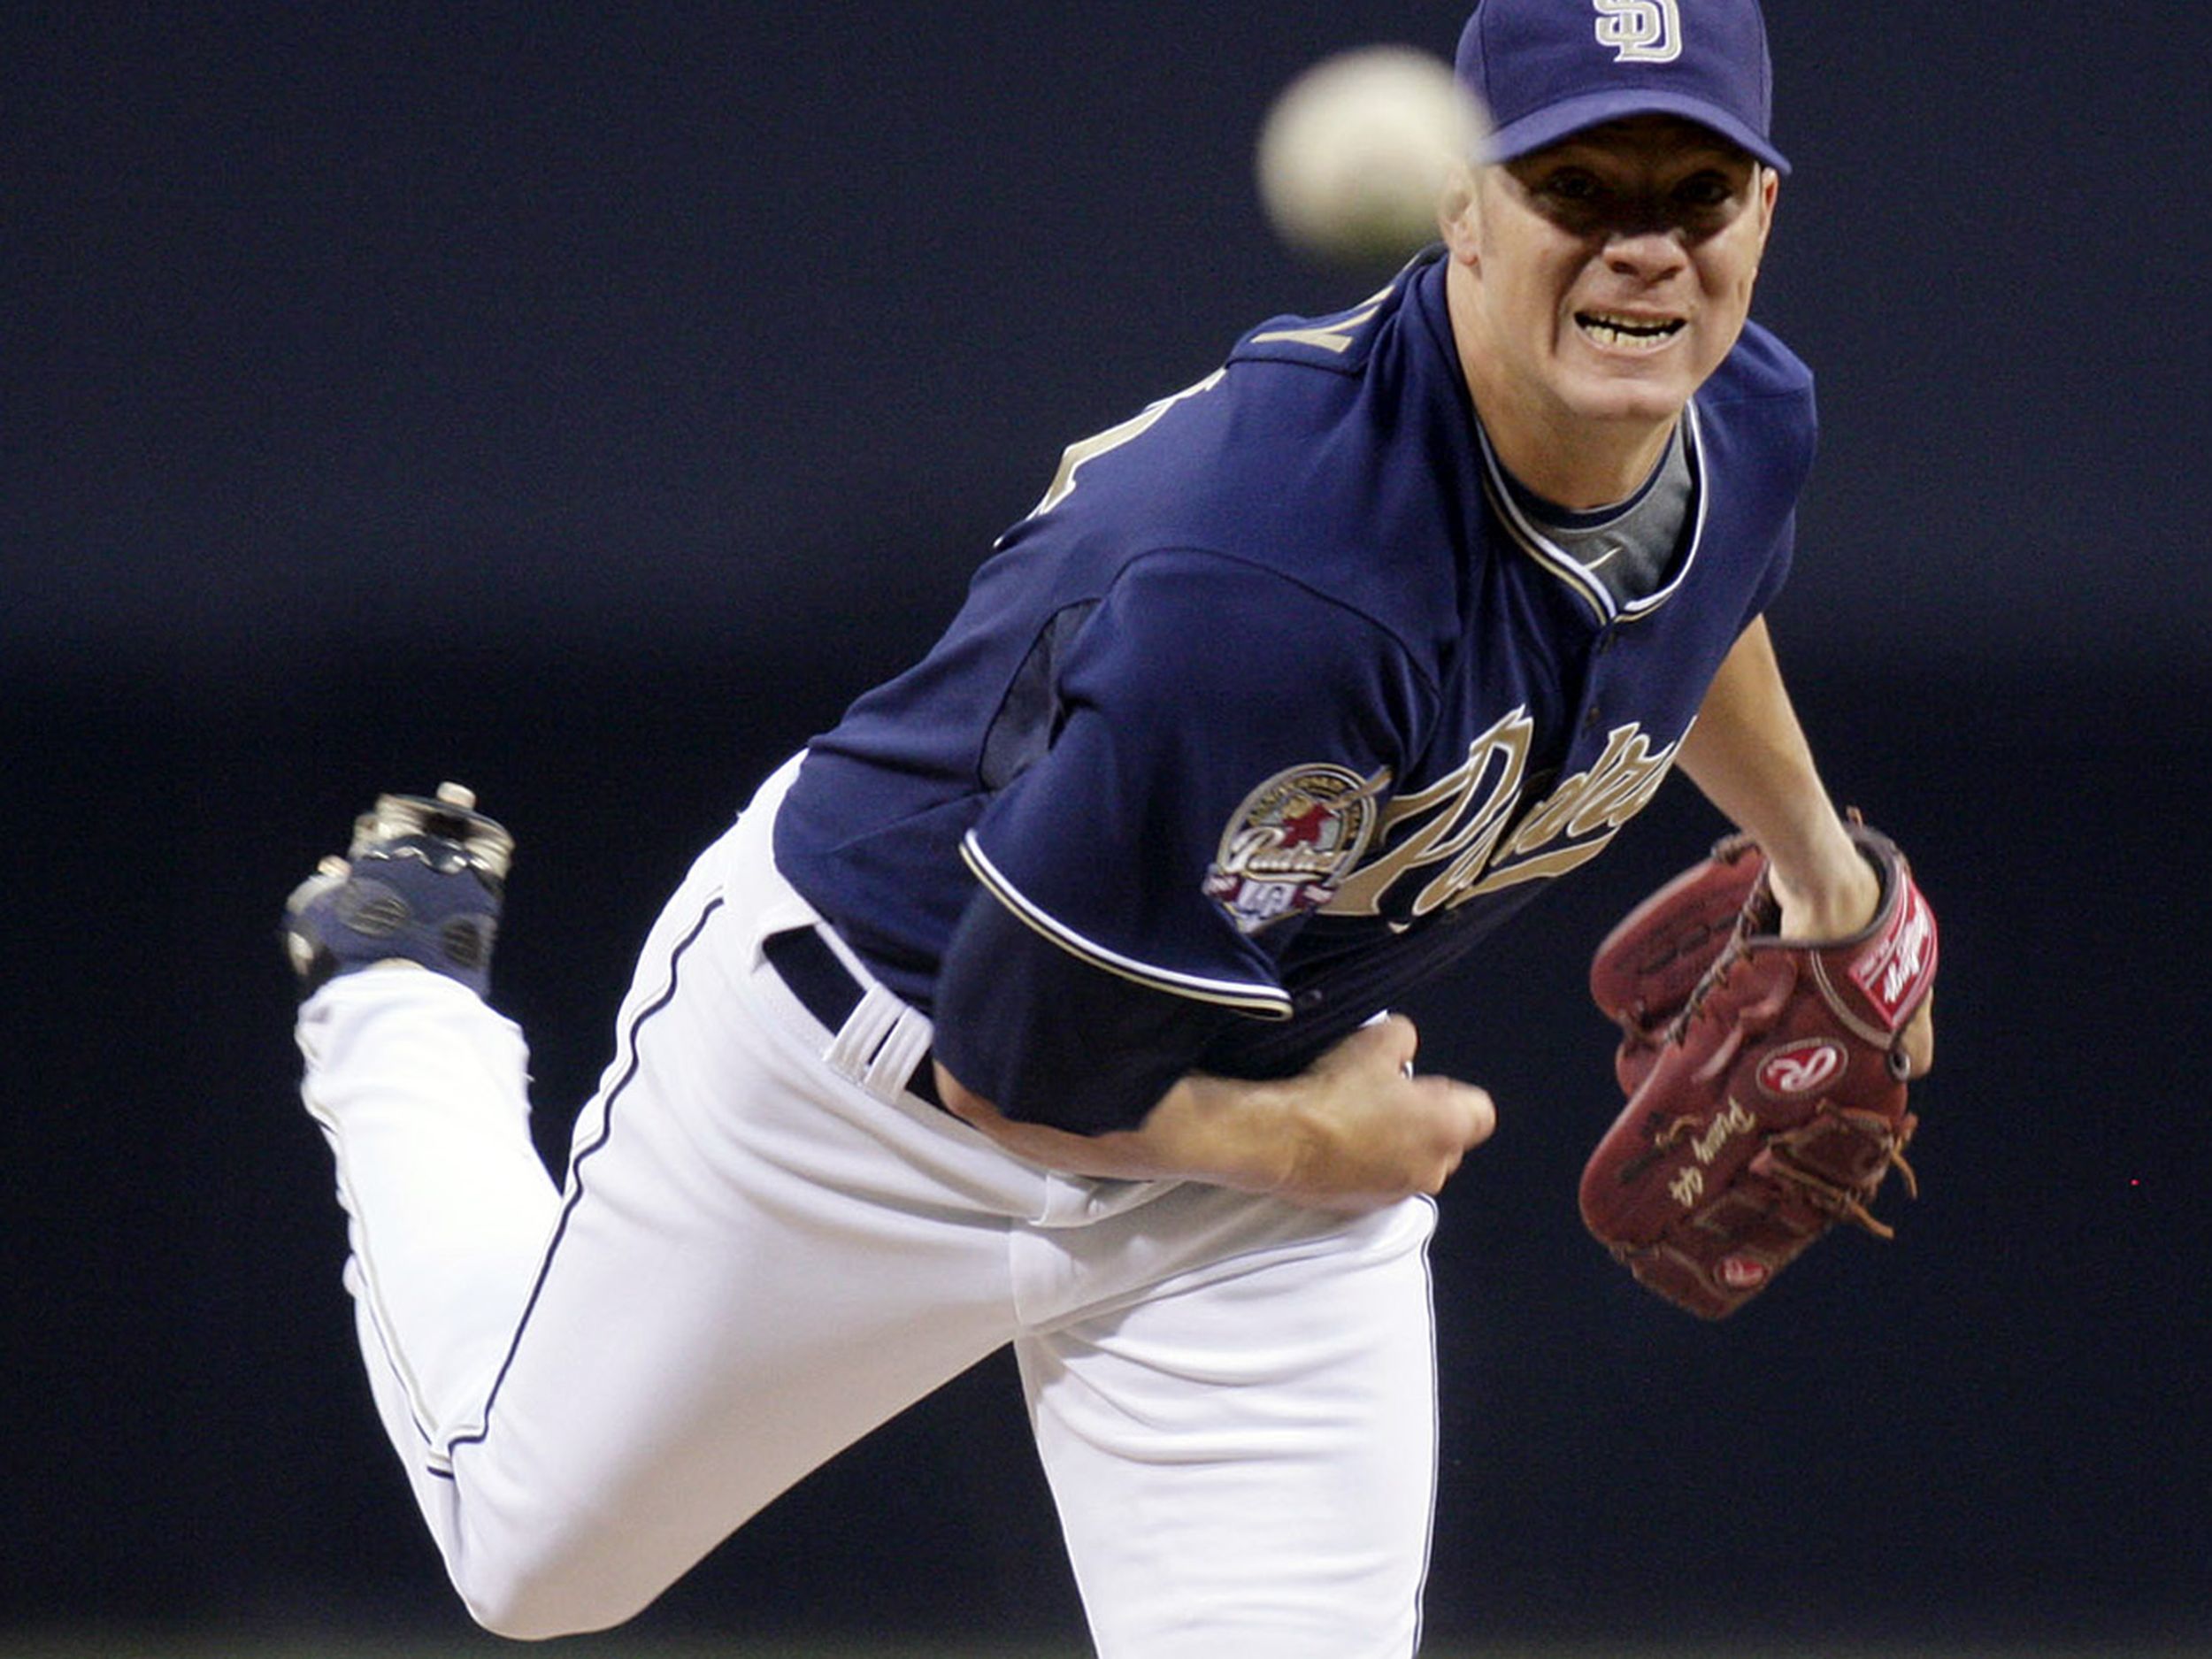 Jake Peavy was DOMINANT with the Padres! Take a look at his most